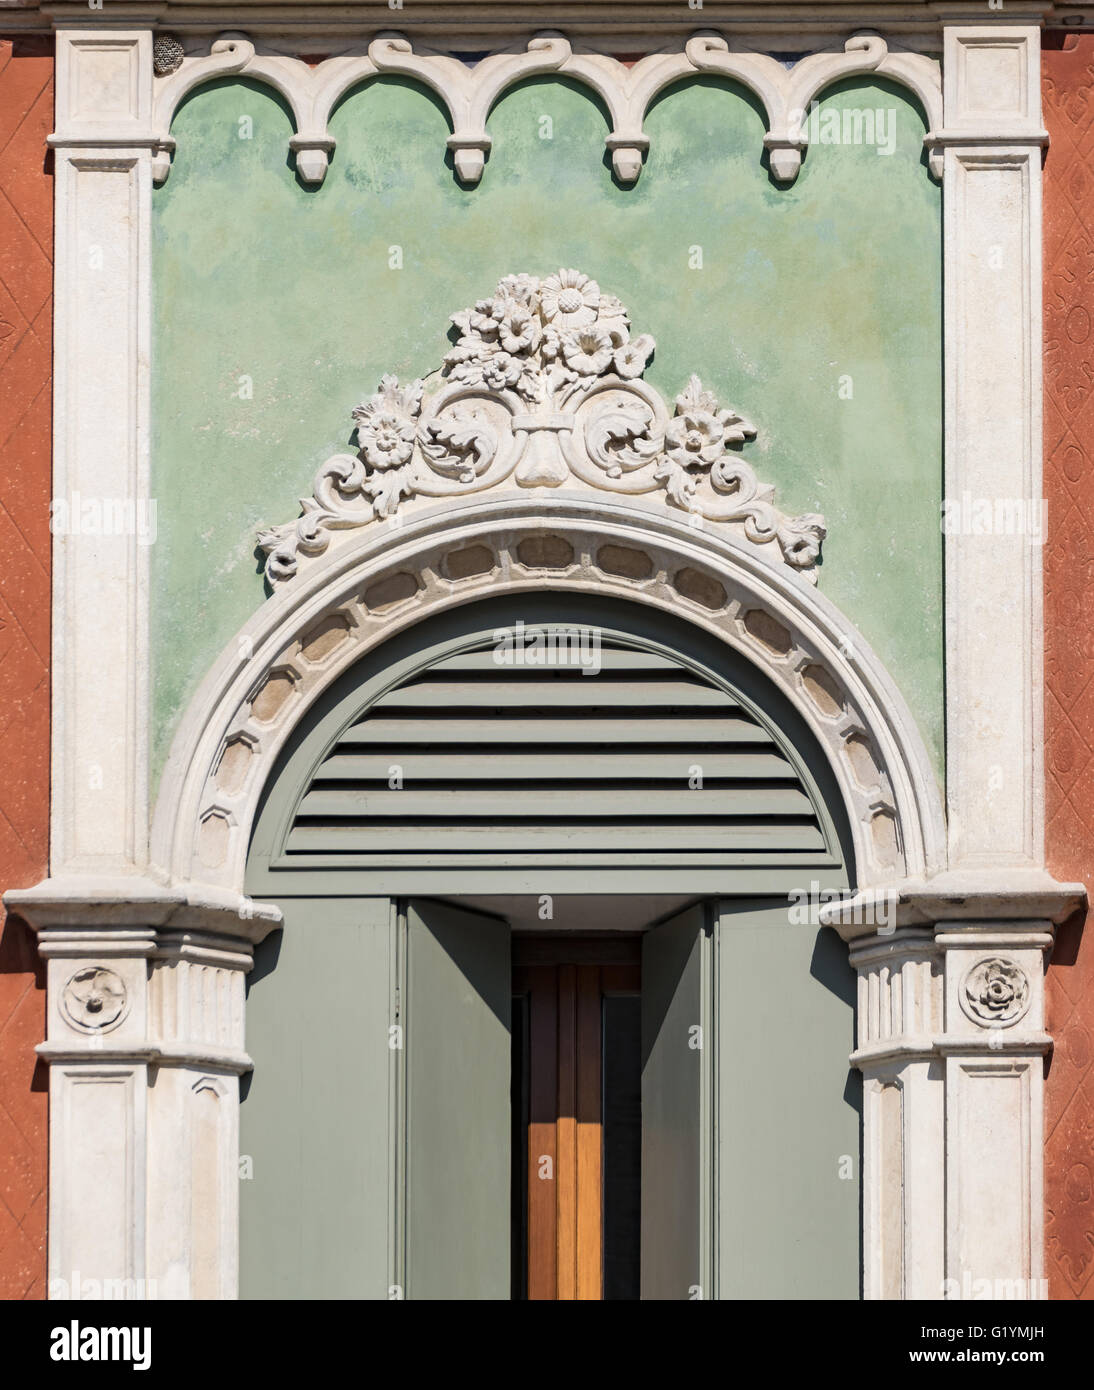 Detail of a window in Venetian Gothic style of an old Italian palace. Stock Photo